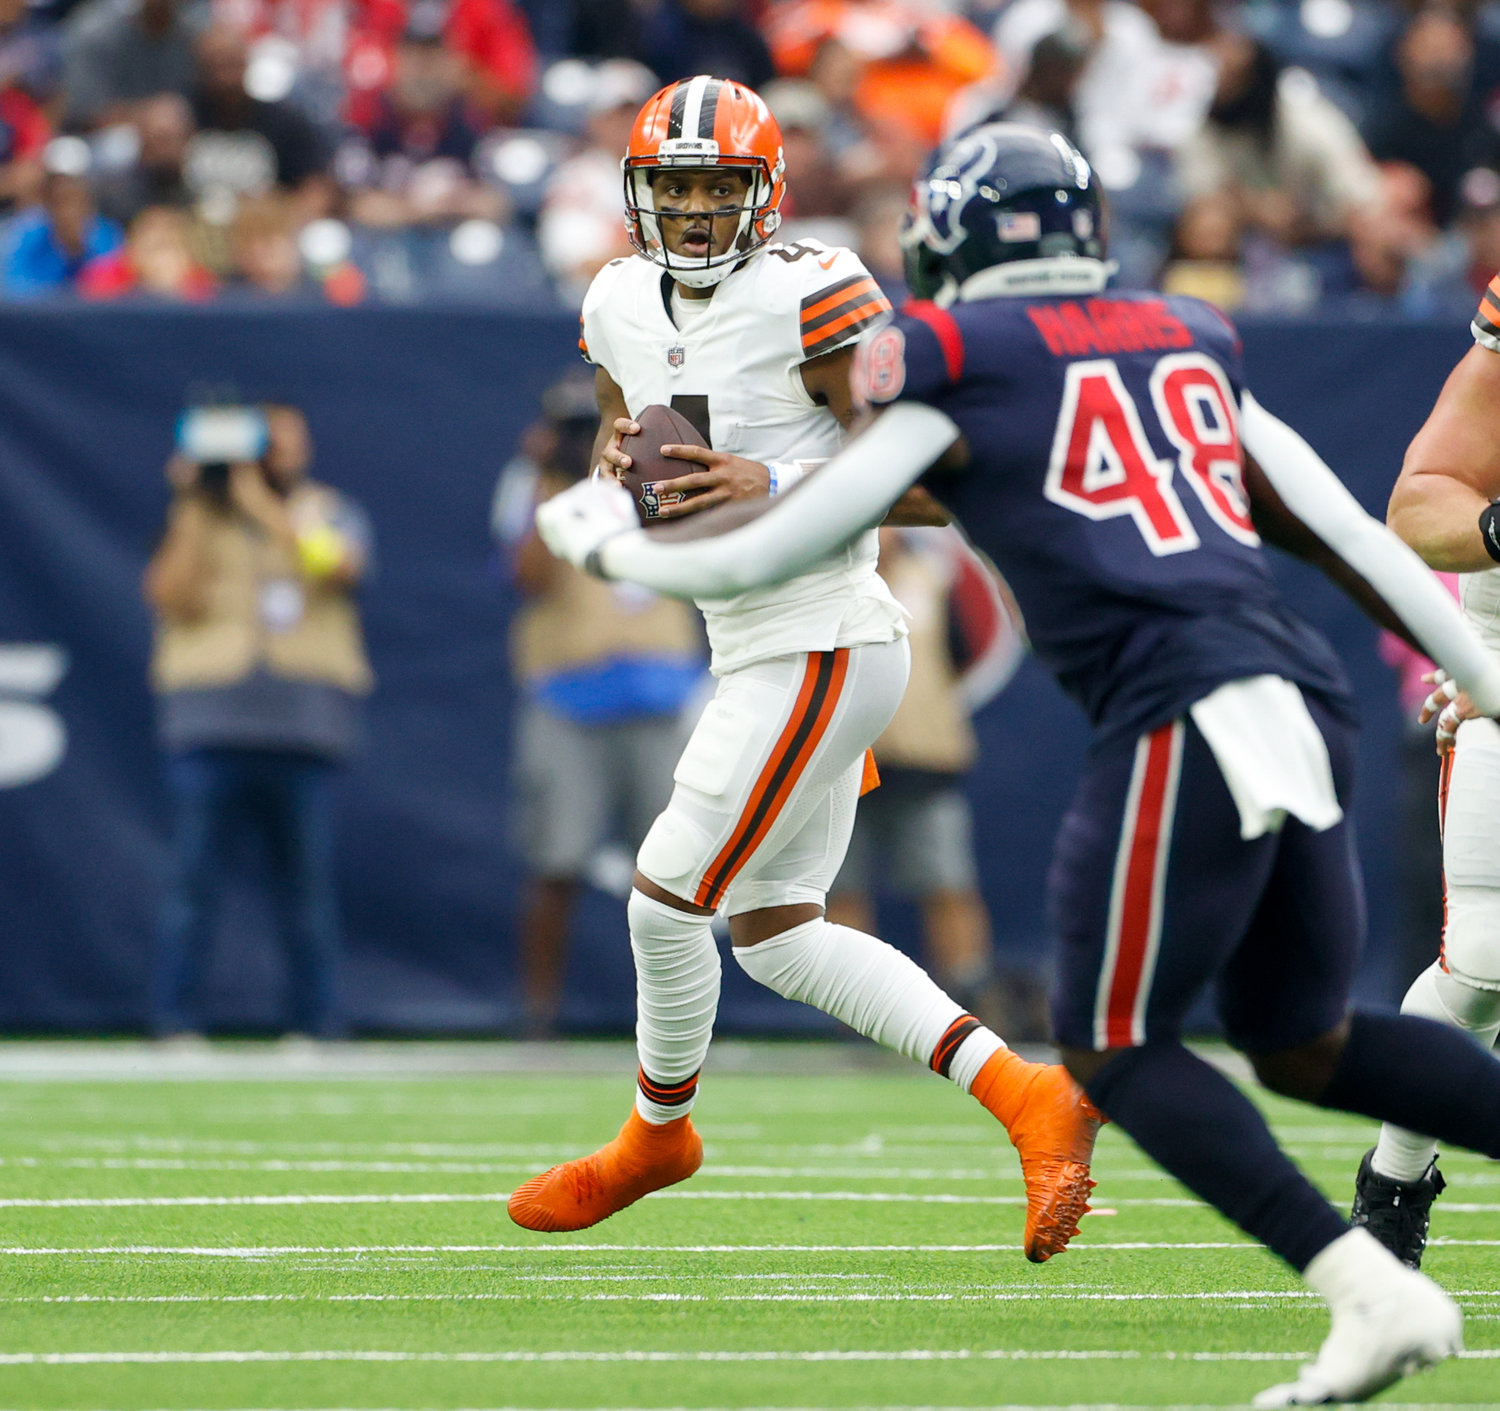 Cleveland Browns quarterback Deshaun Watson (4) drops back to pass during an NFL game between the Houston Texans and the Cleveland Browns on Dec. 4, 2022, in Houston. The Browns won, 27-14.